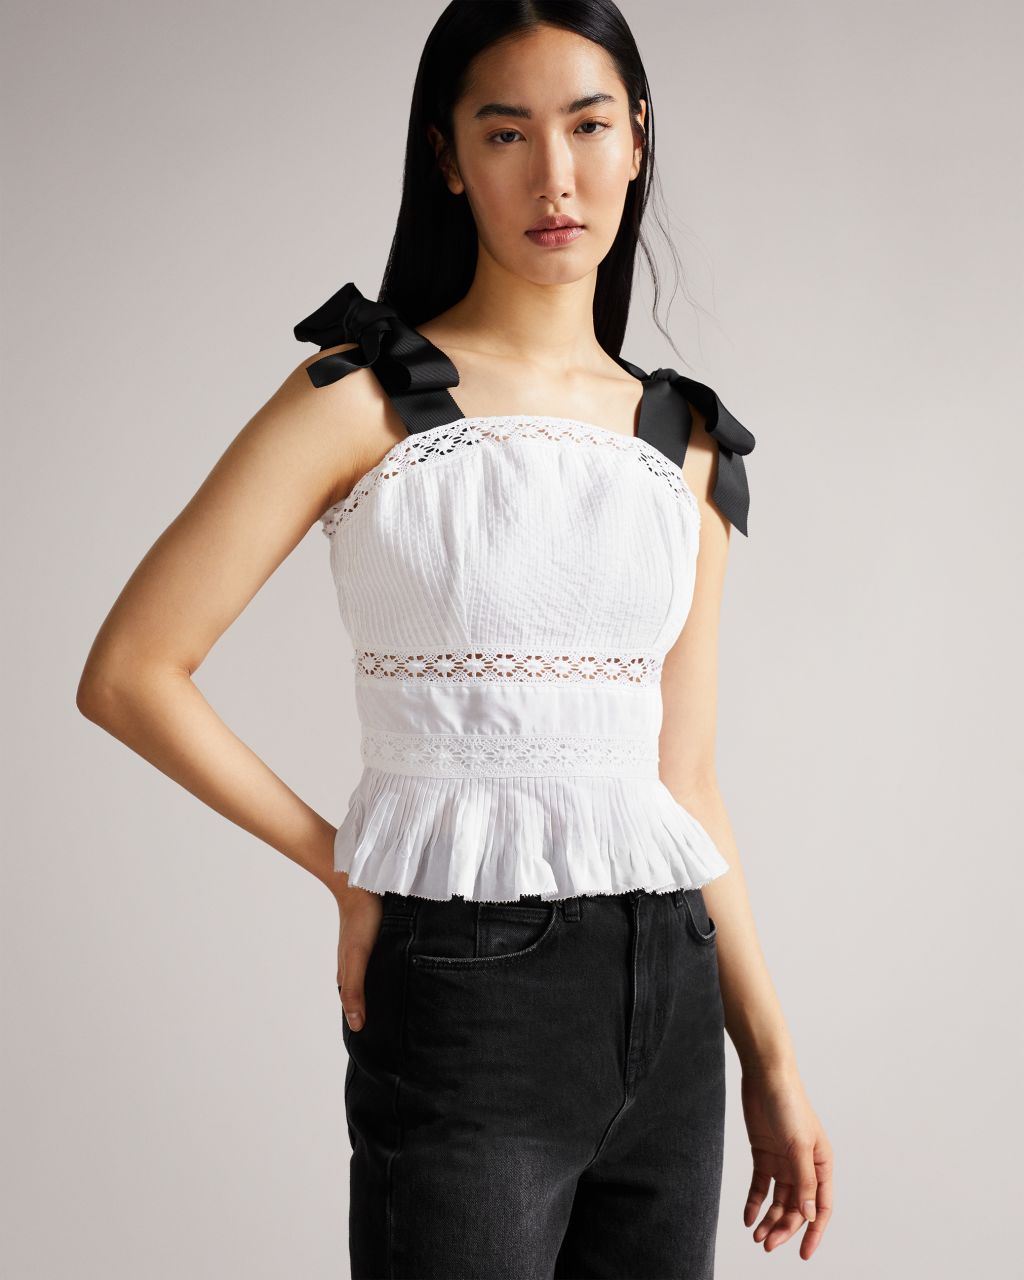 Ted Baker Women's Lace Insert Peplum Top With Grosgrain Straps in White, Pietri